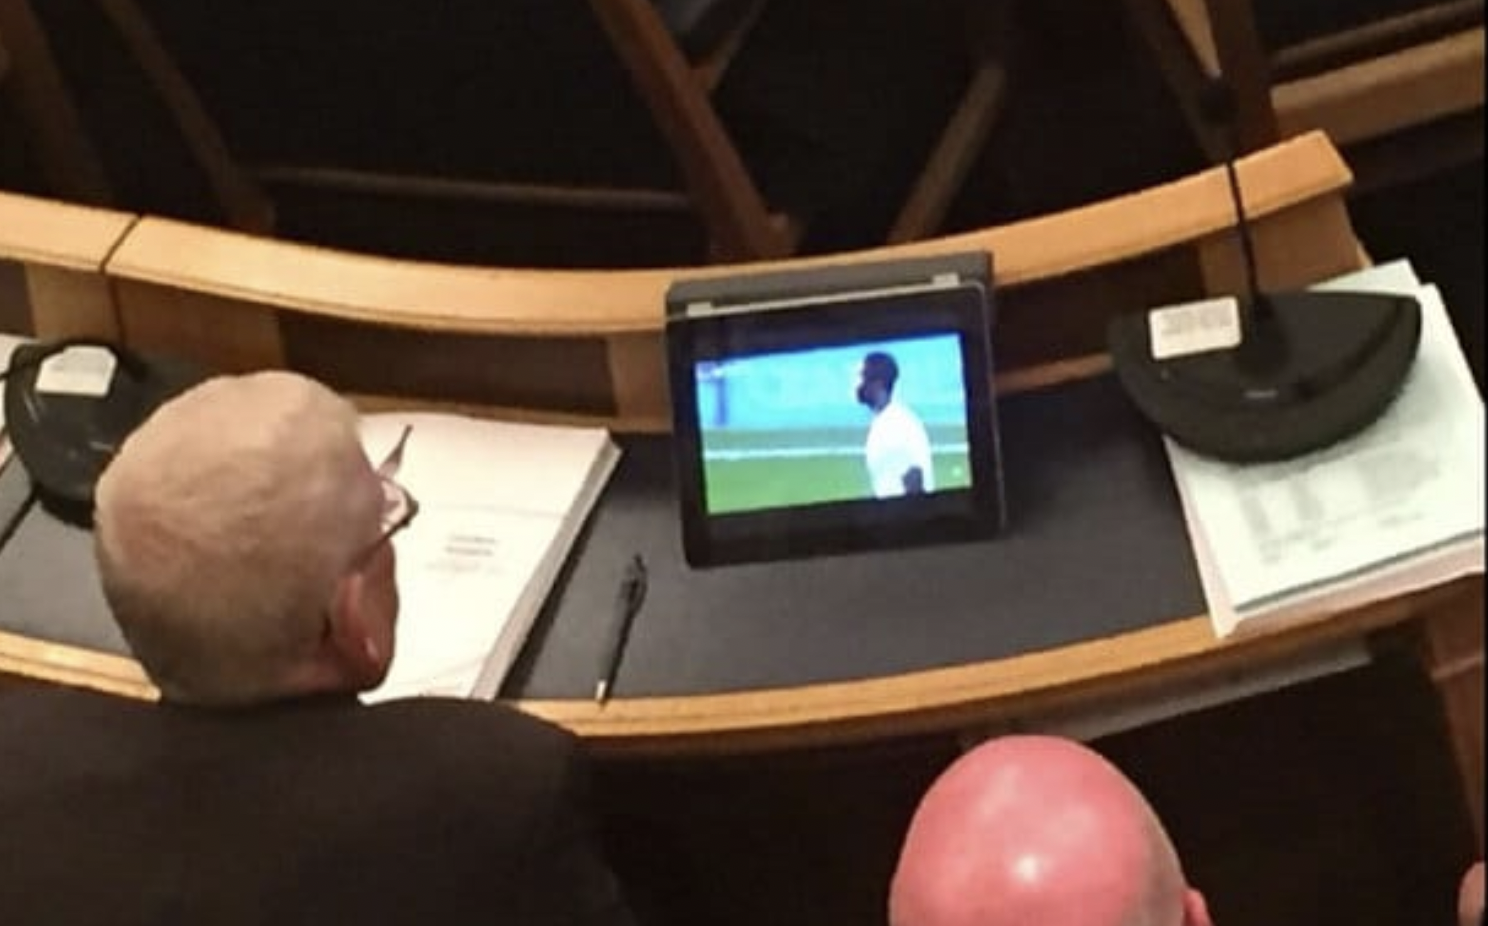 Croydon Labour councilors caught watching football during meeting to discuss cuts.